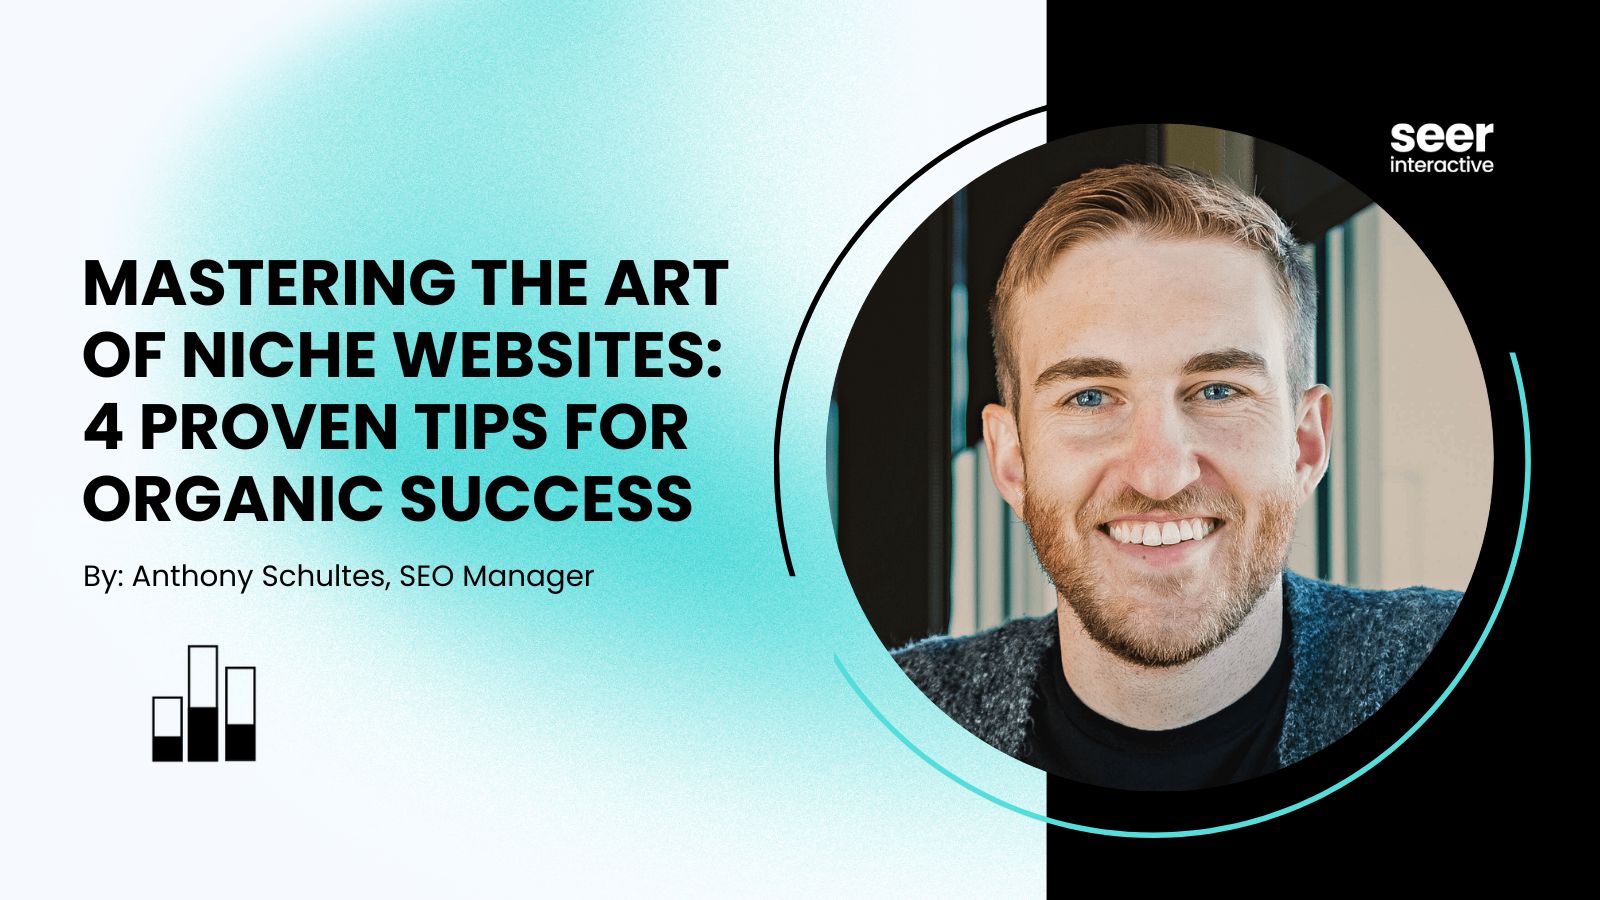 Mastering the Art of Niche Websites: 4 Proven Tips for Organic Success